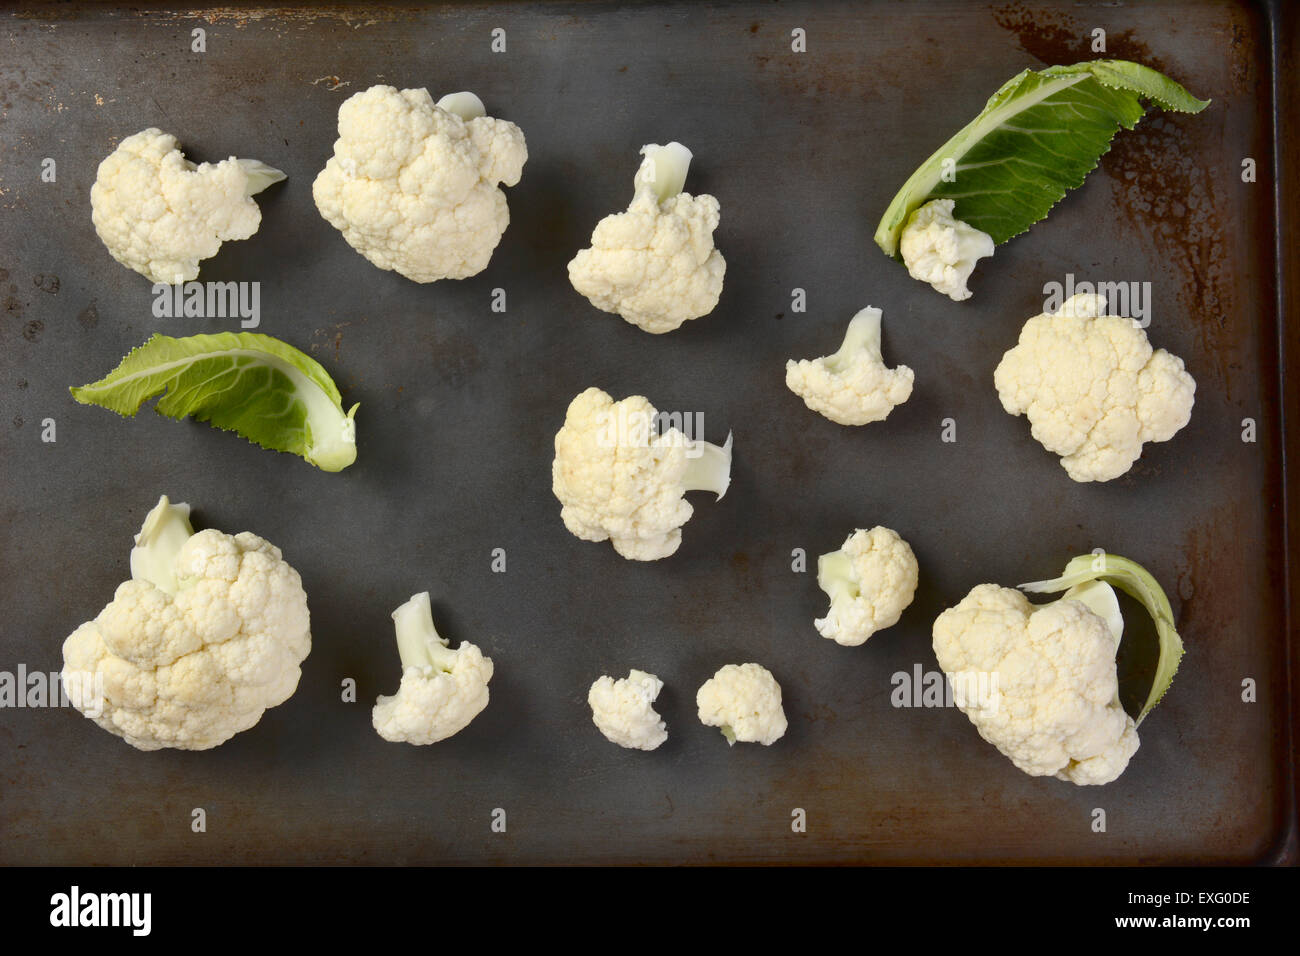 High angle view of cauliflower florets on a metal baking sheet. Horizontal format. Stock Photo